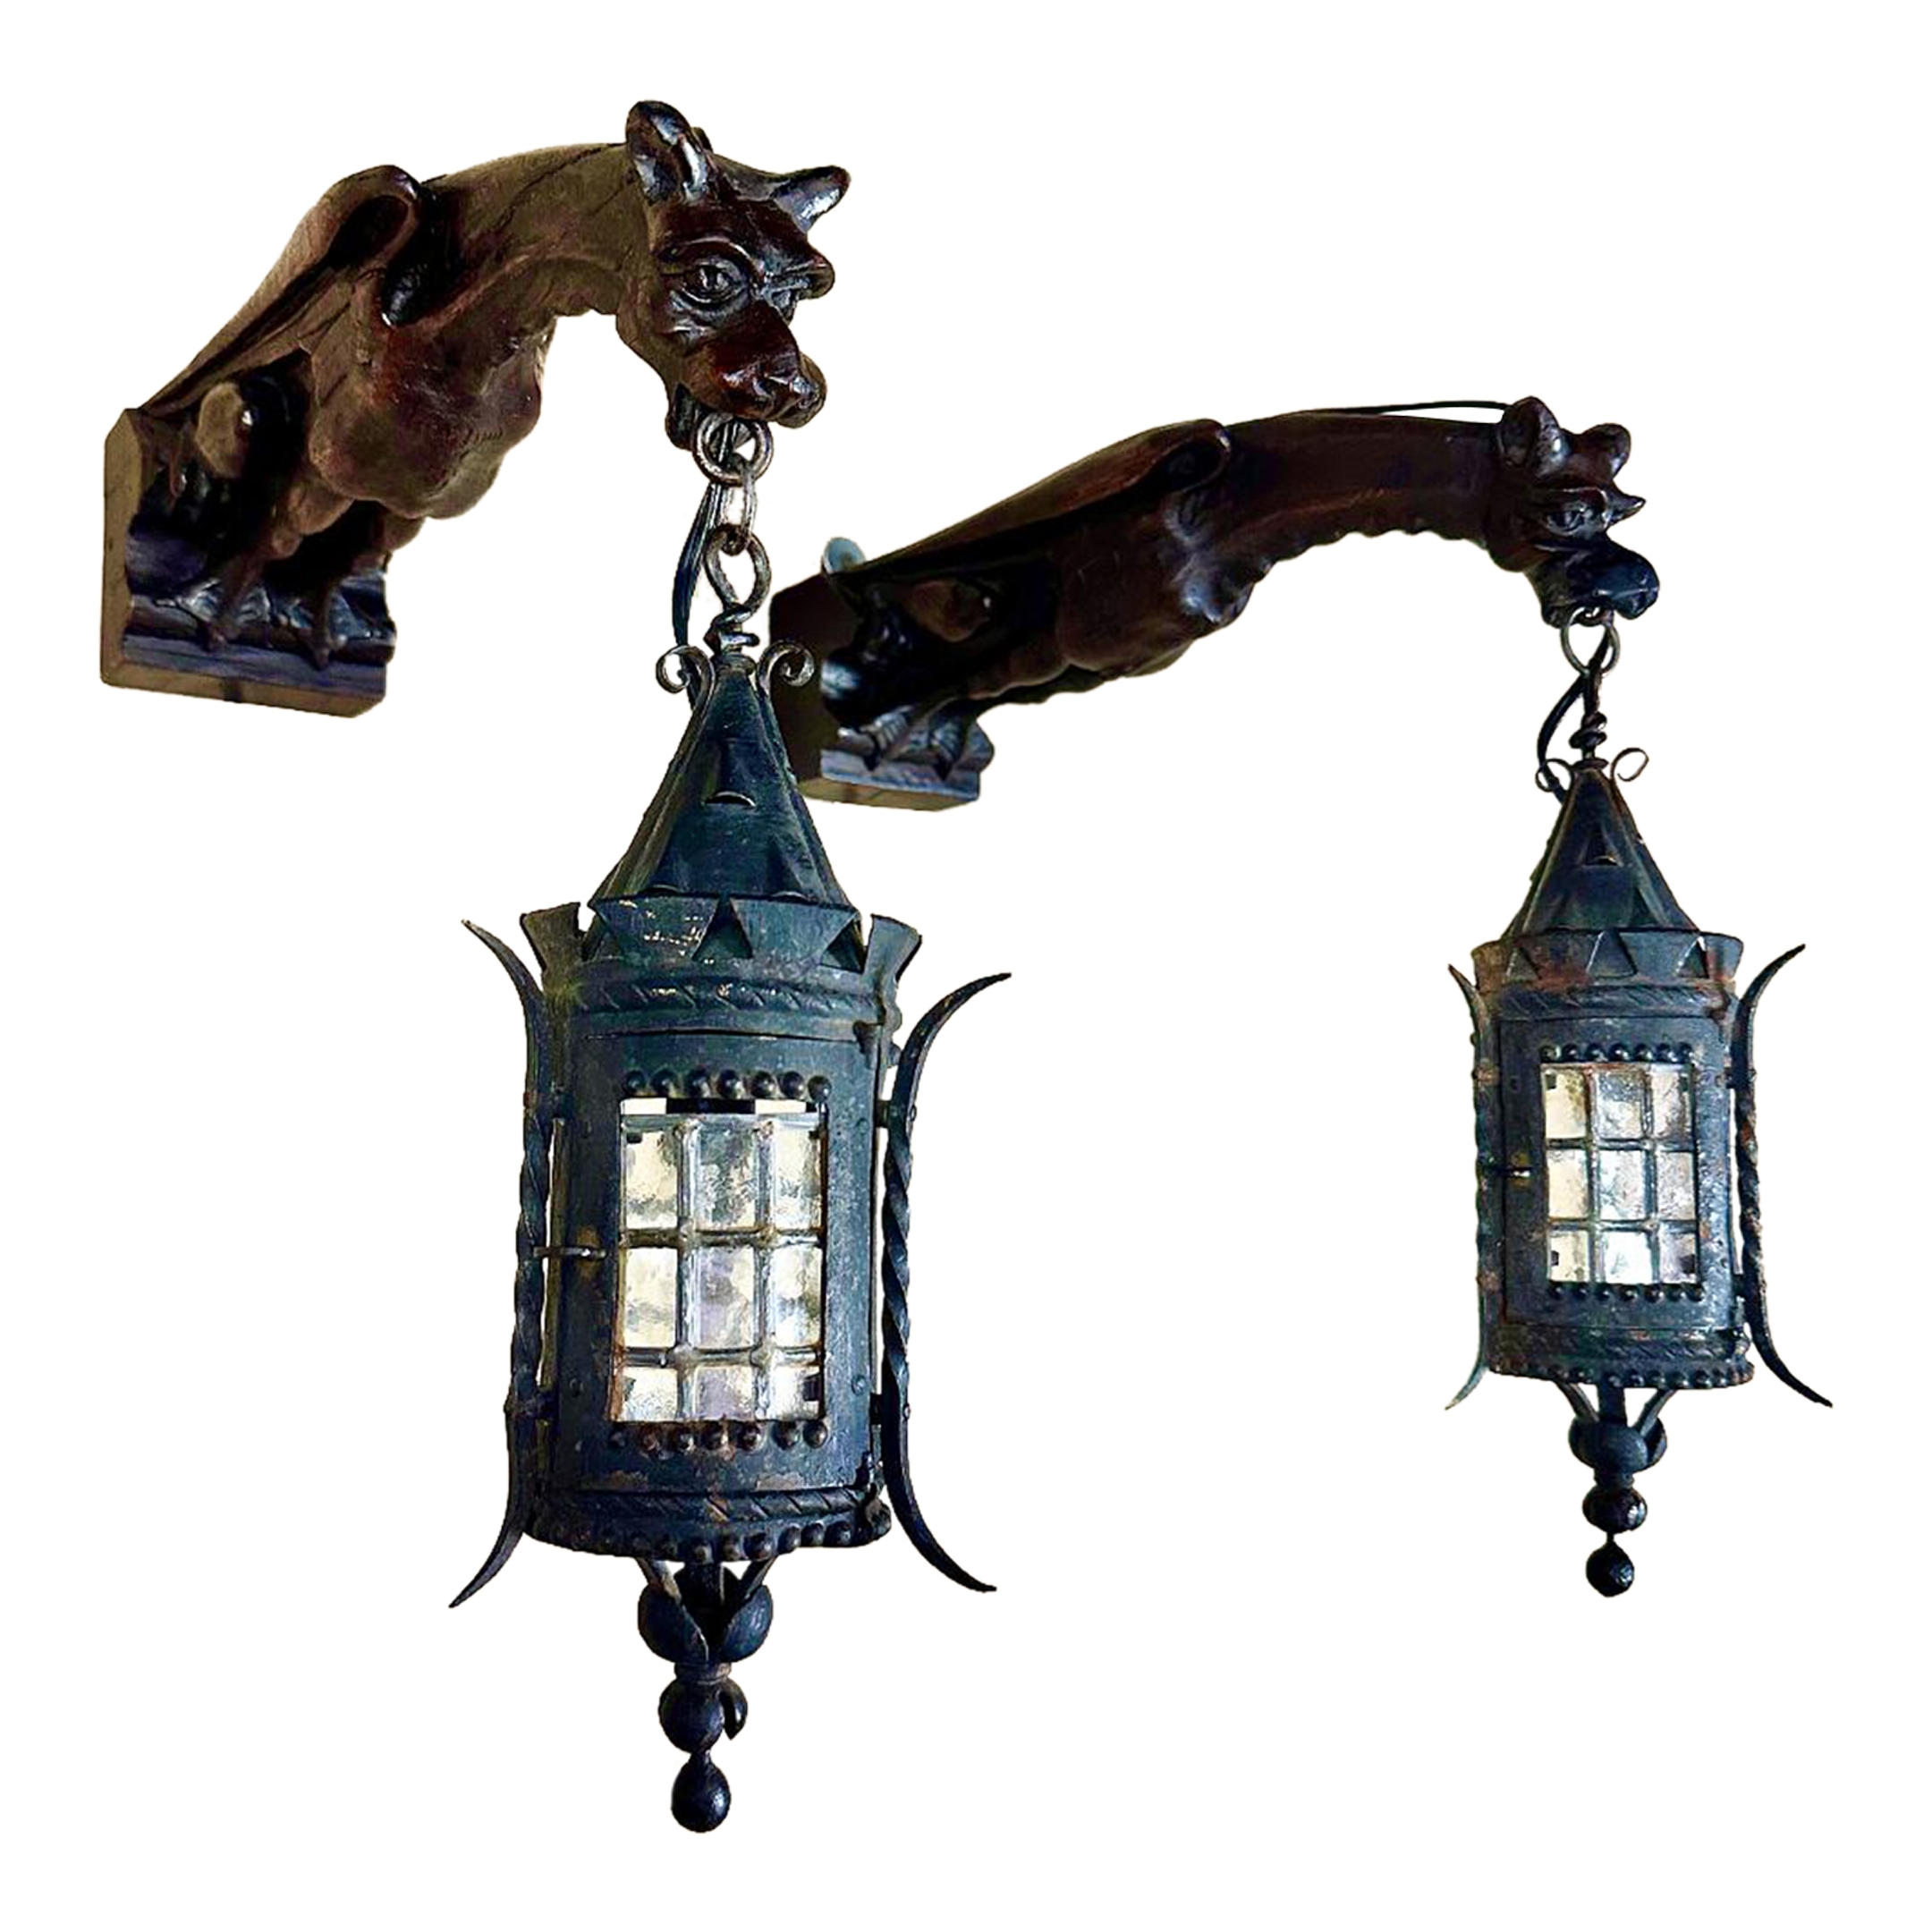 Salme Tranquility panel Pair Gothic Hand-Carved Gargoyle Lantern Wall Sconces